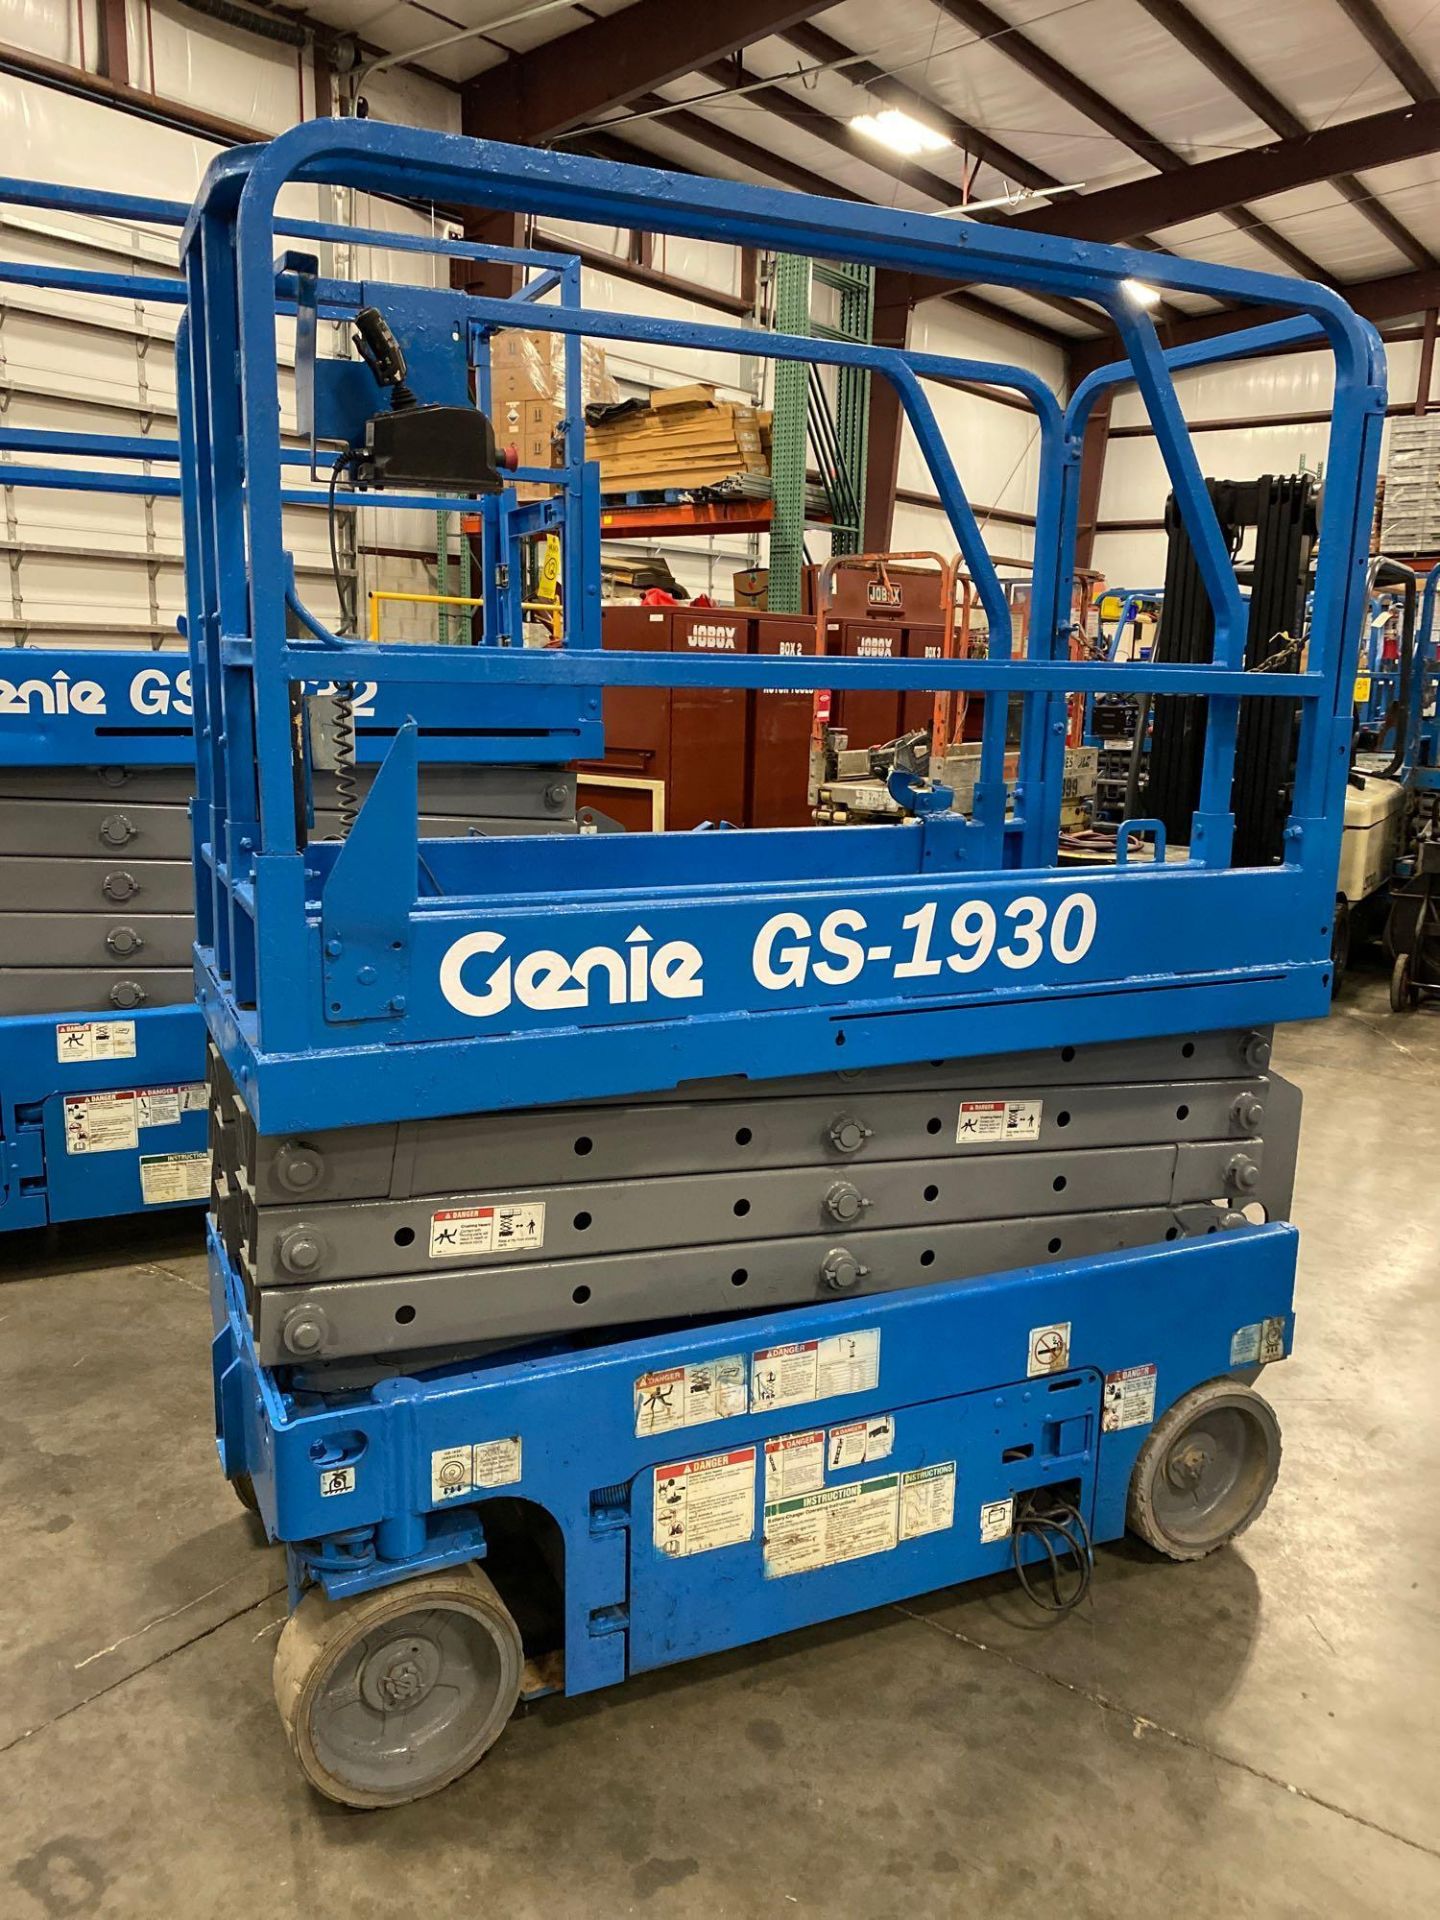 GENIE GS1930 SCISSOR LIFT, SELF PROPELLED, 19' PLATFORM HEIGHT, BUILT IN BATTERY CHARGER, SLIDE OUT - Image 3 of 5